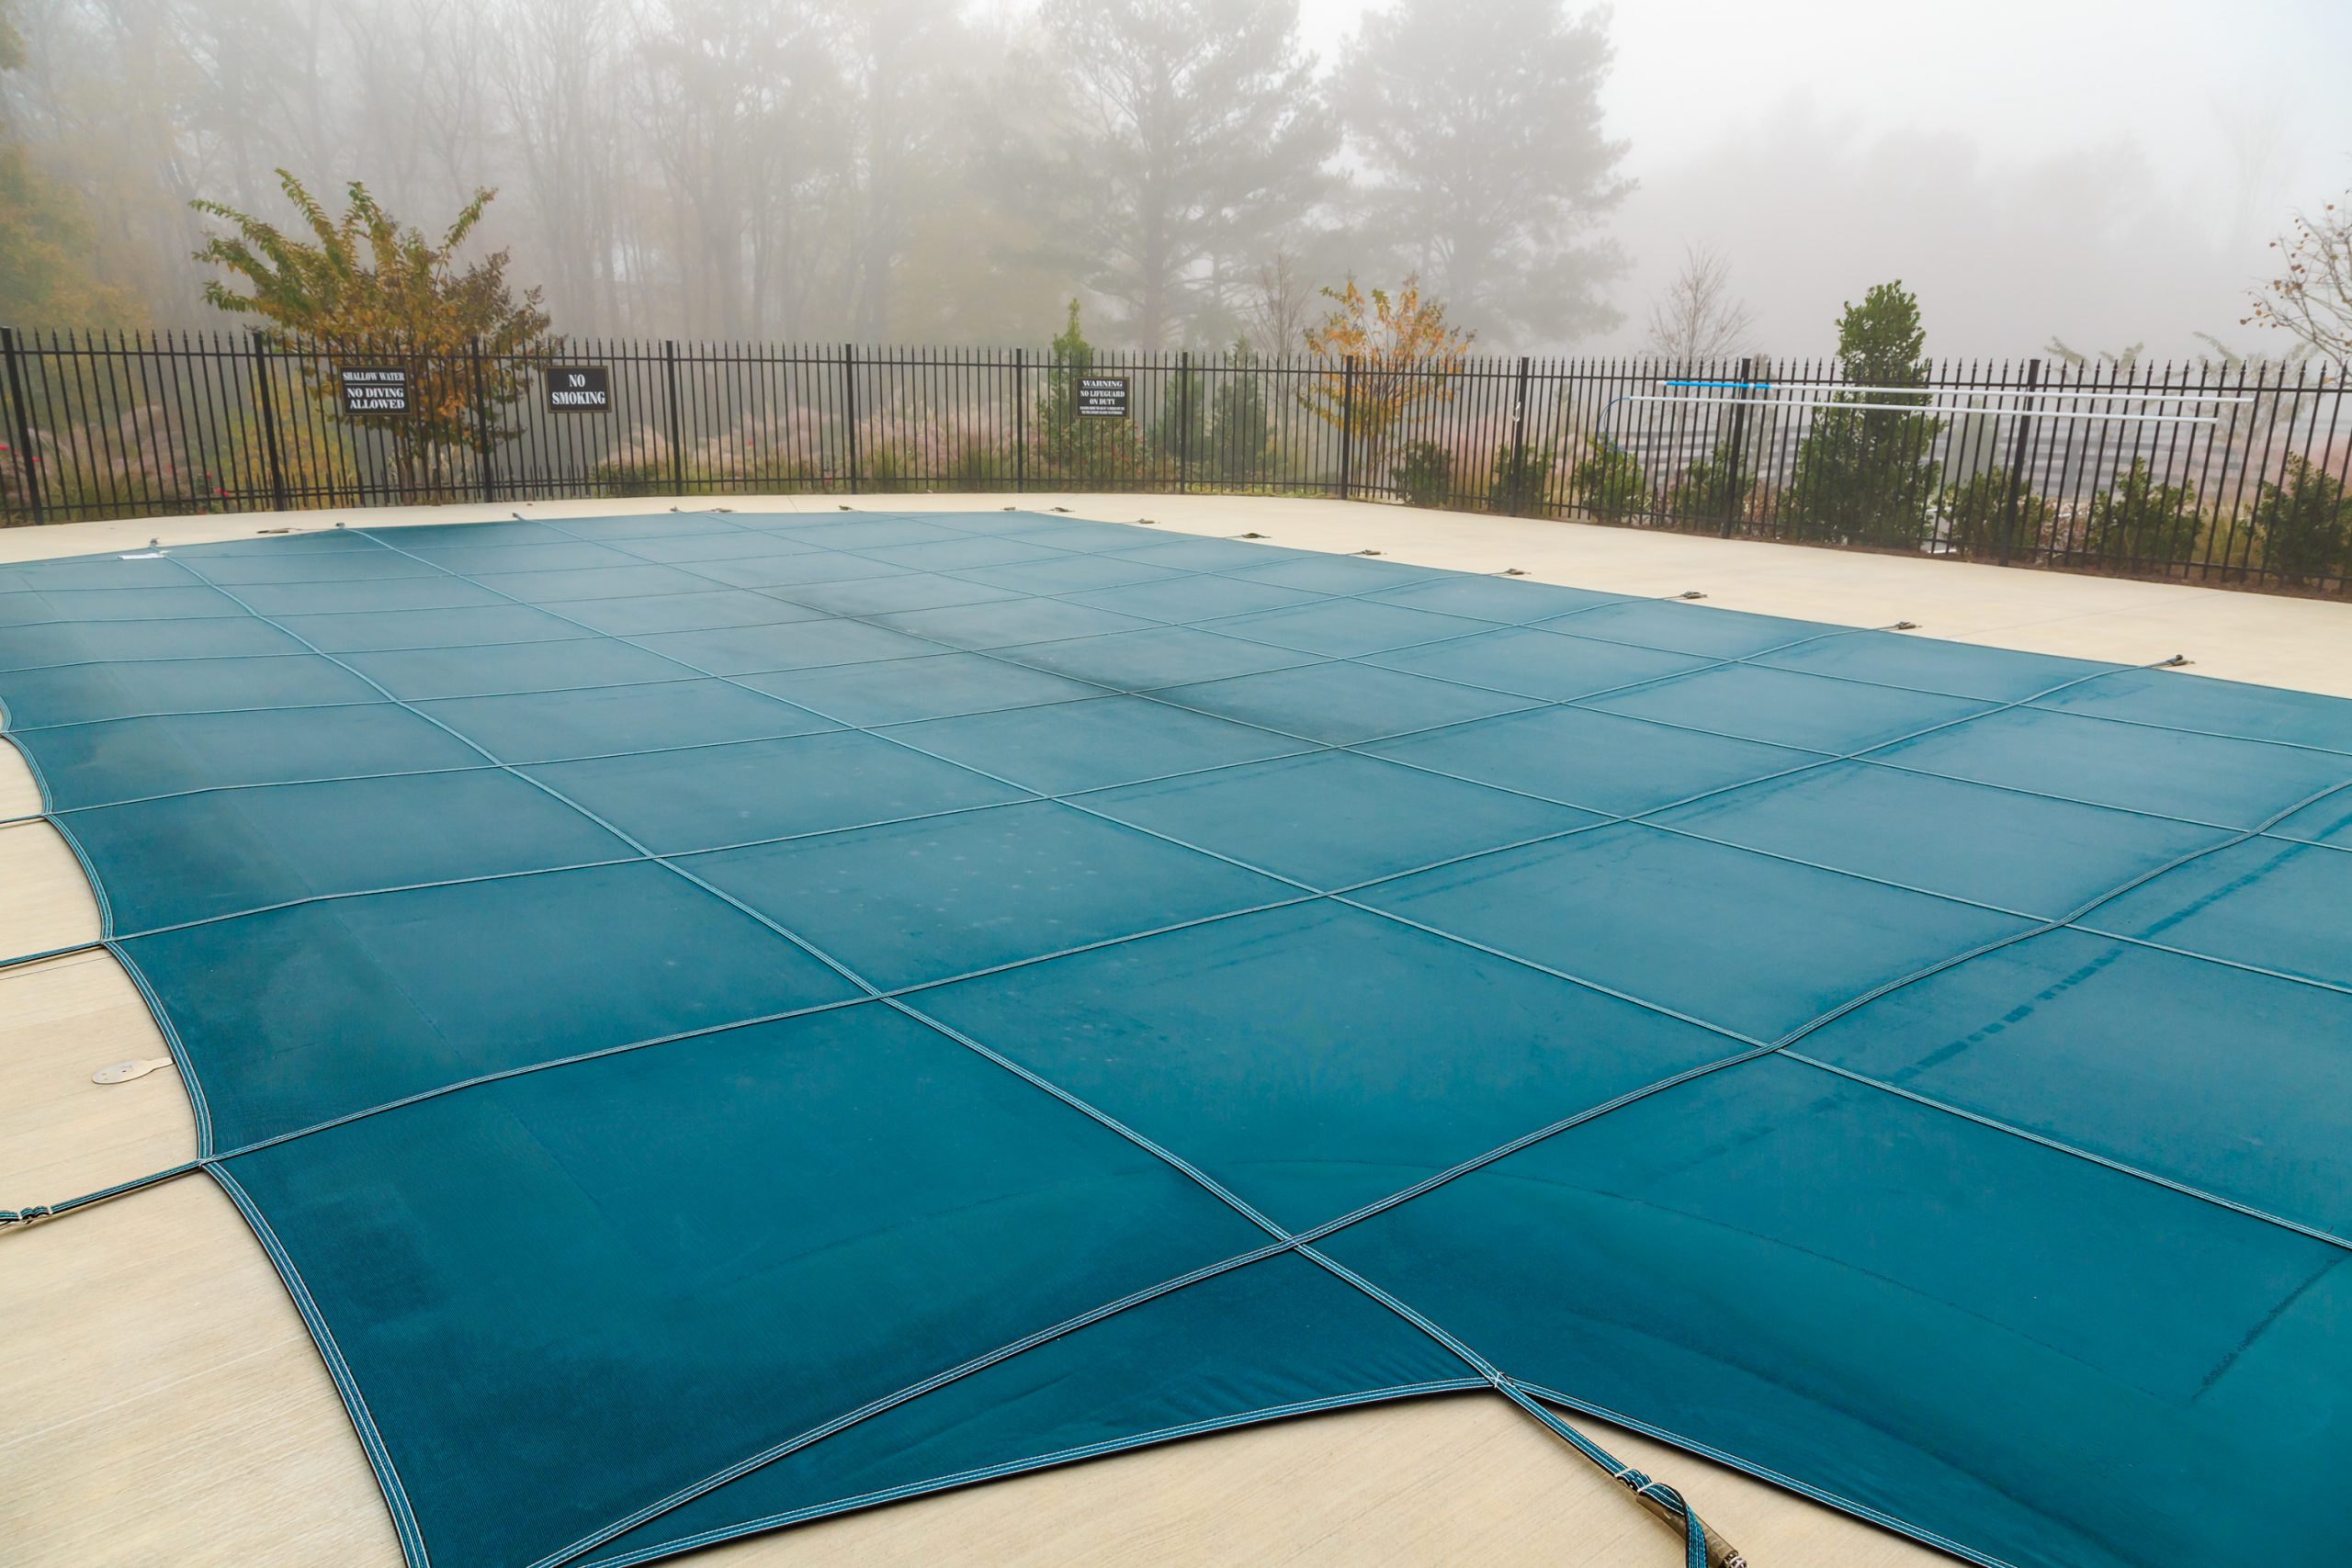 Still Time to Schedule Your Pool Closing